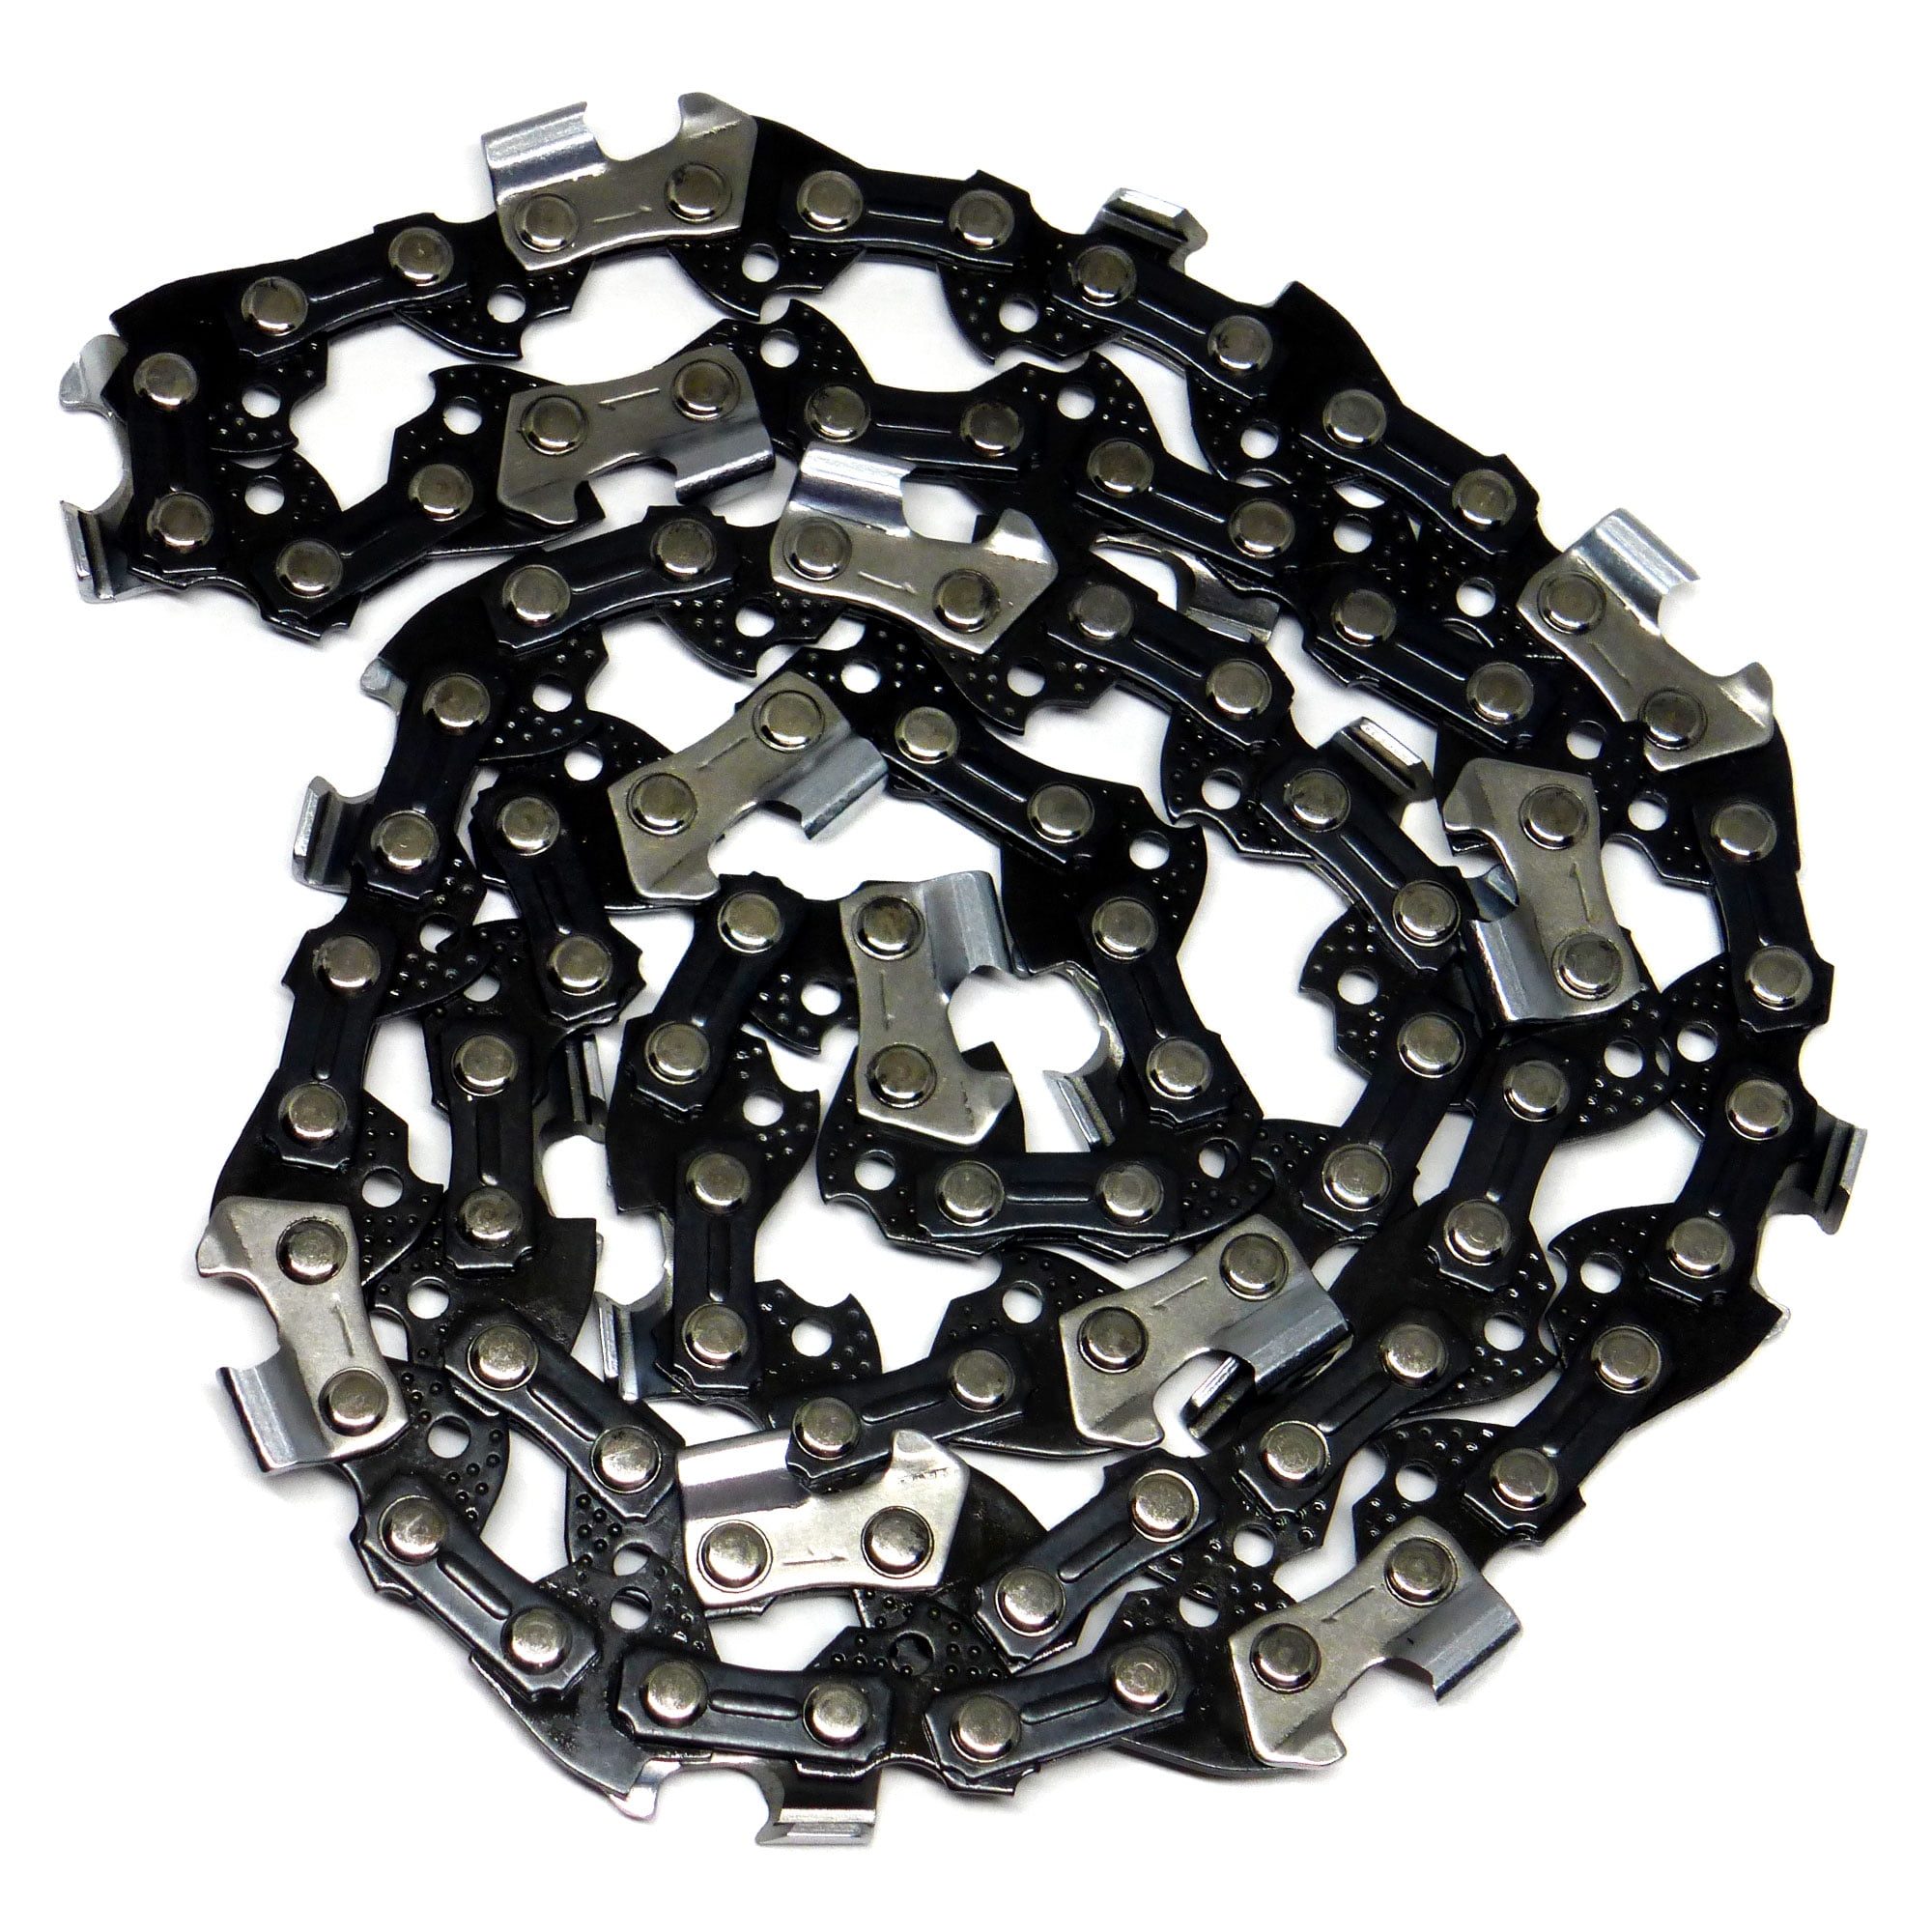 Details about  / 1-3PC 18/" Chainsaw Saw Chain Blade 3//8/" LP .05/" Gauge 62DL Driver-Link Universal